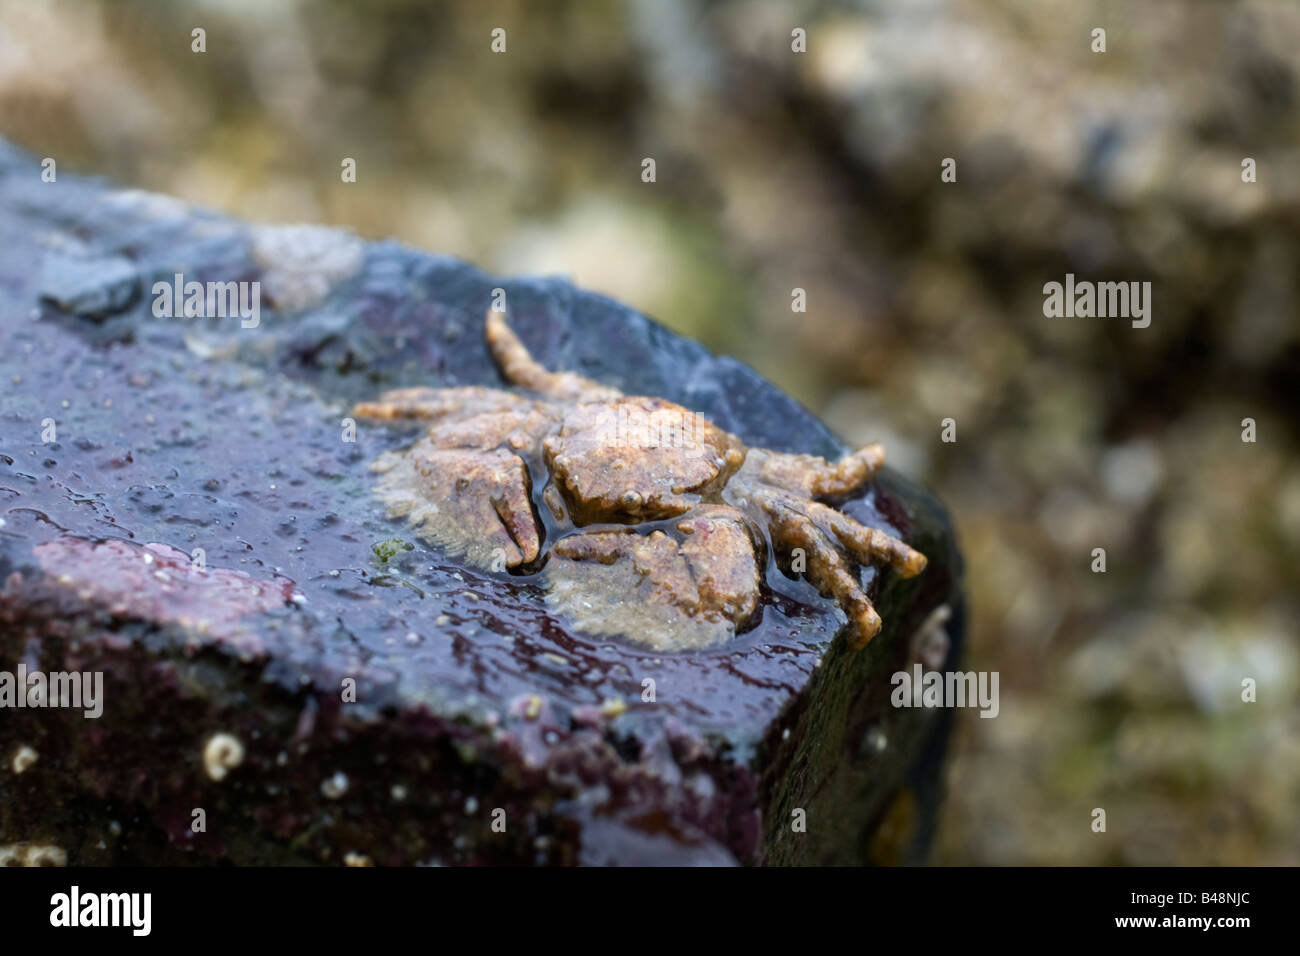 broad clawed porcelain crab Porcellana platycheles Stock Photo